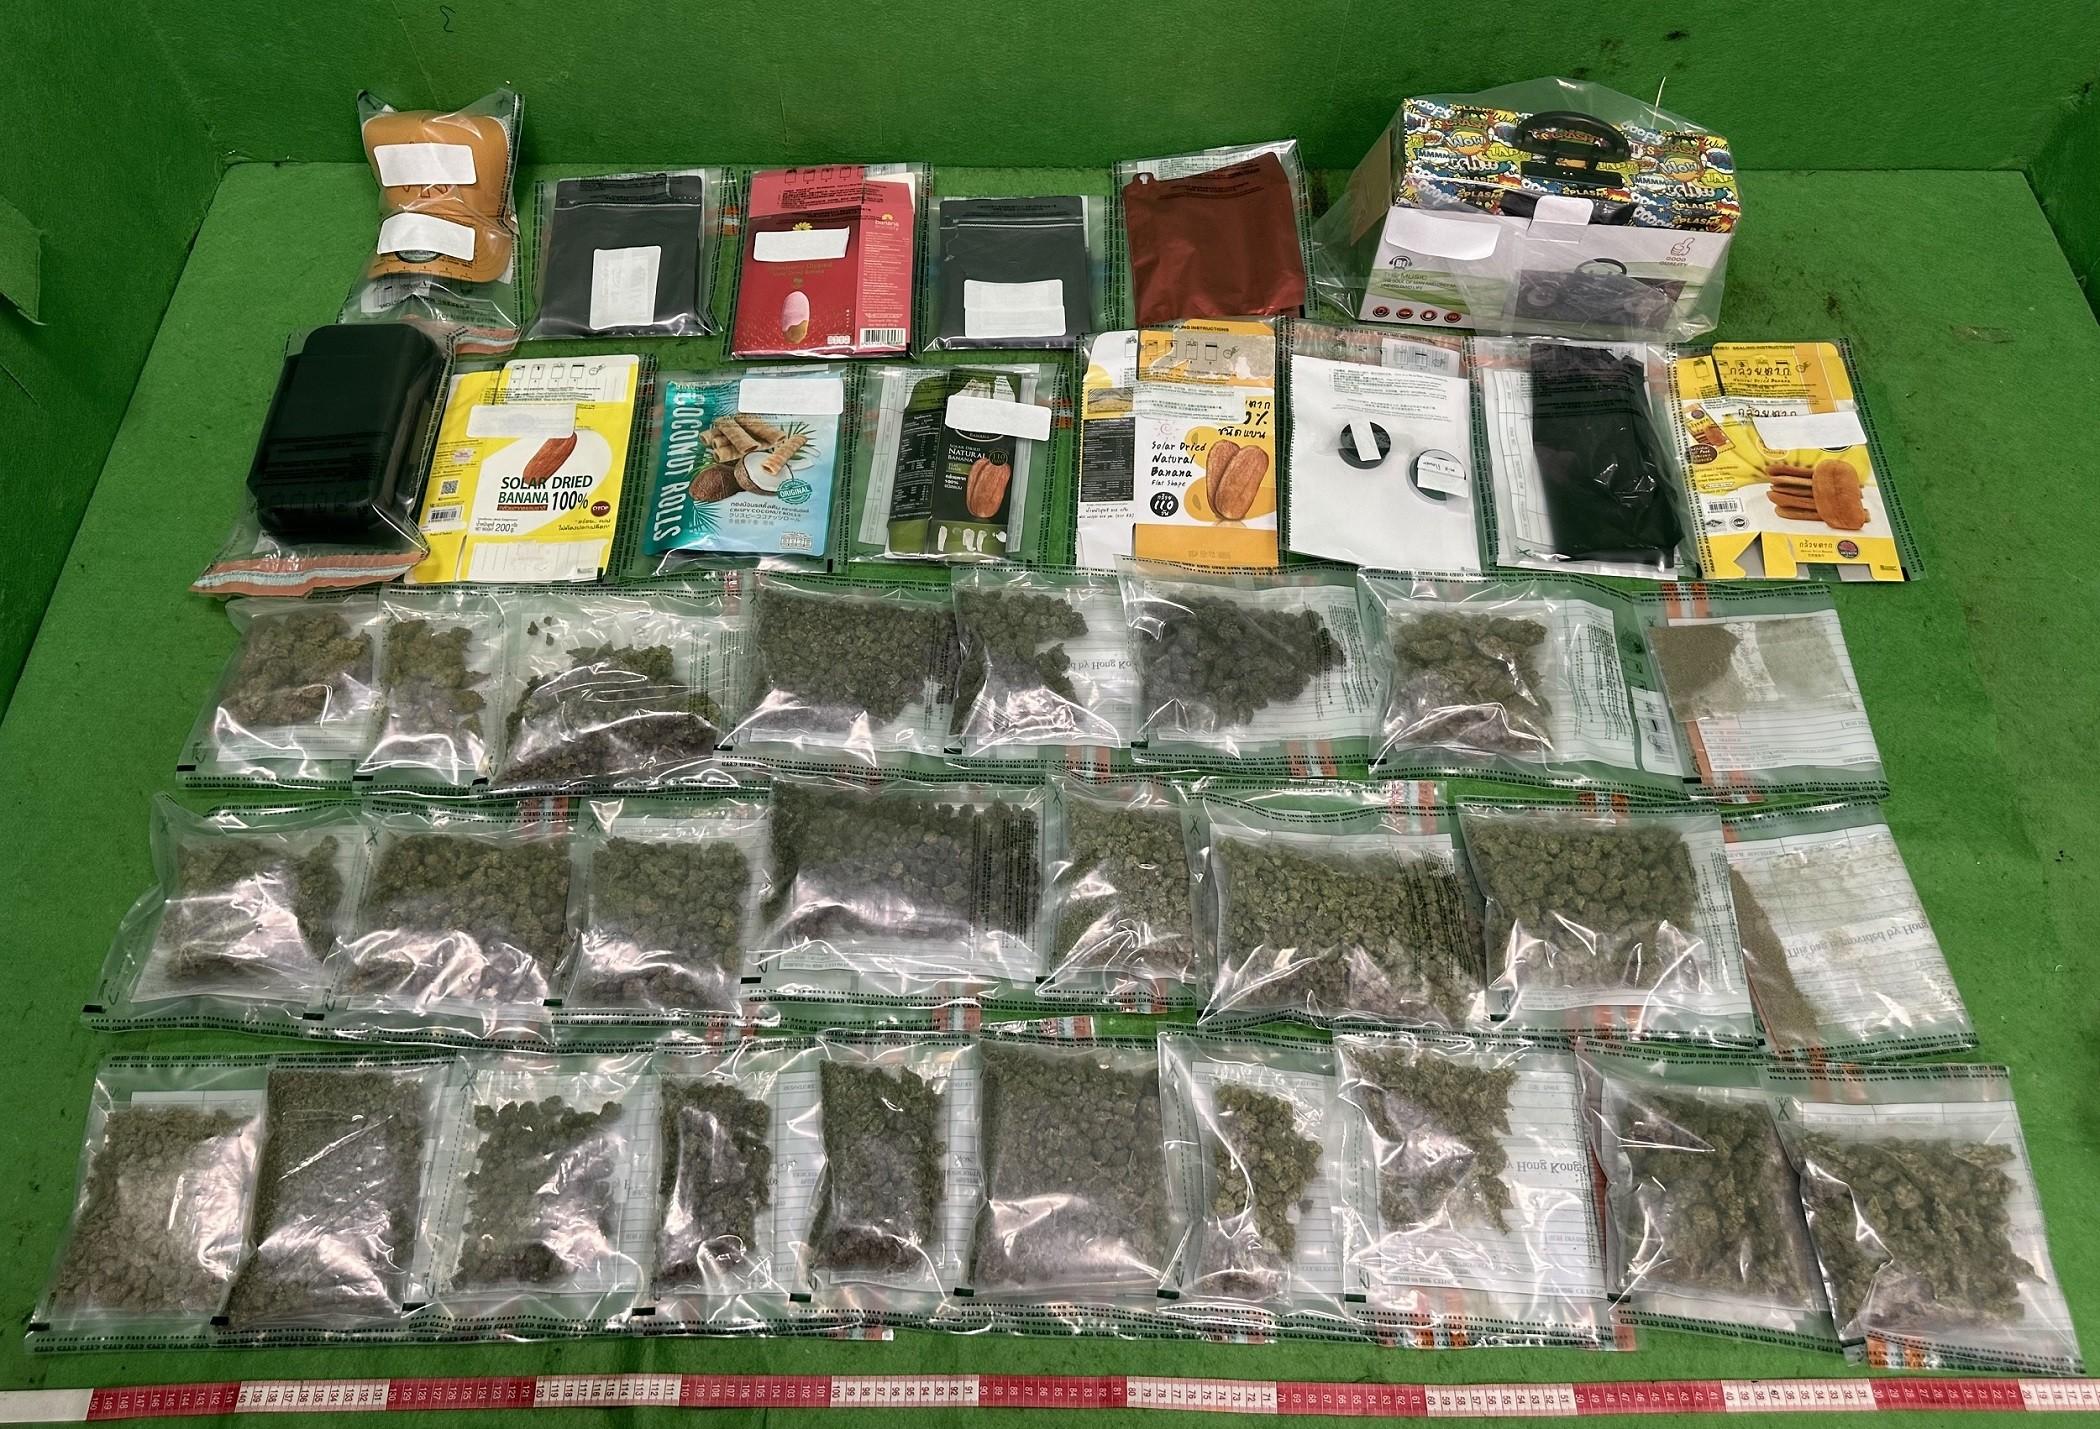 Hong Kong Customs yesterday (June 5) detected an incoming passenger drug trafficking case at Hong Kong International Airport and seized about 1.2 kilograms of suspected cannabis buds with an estimated market value of about $240,000. Photo shows the suspected cannabis buds seized, with the snacks packaging and other items used to conceal the drugs.